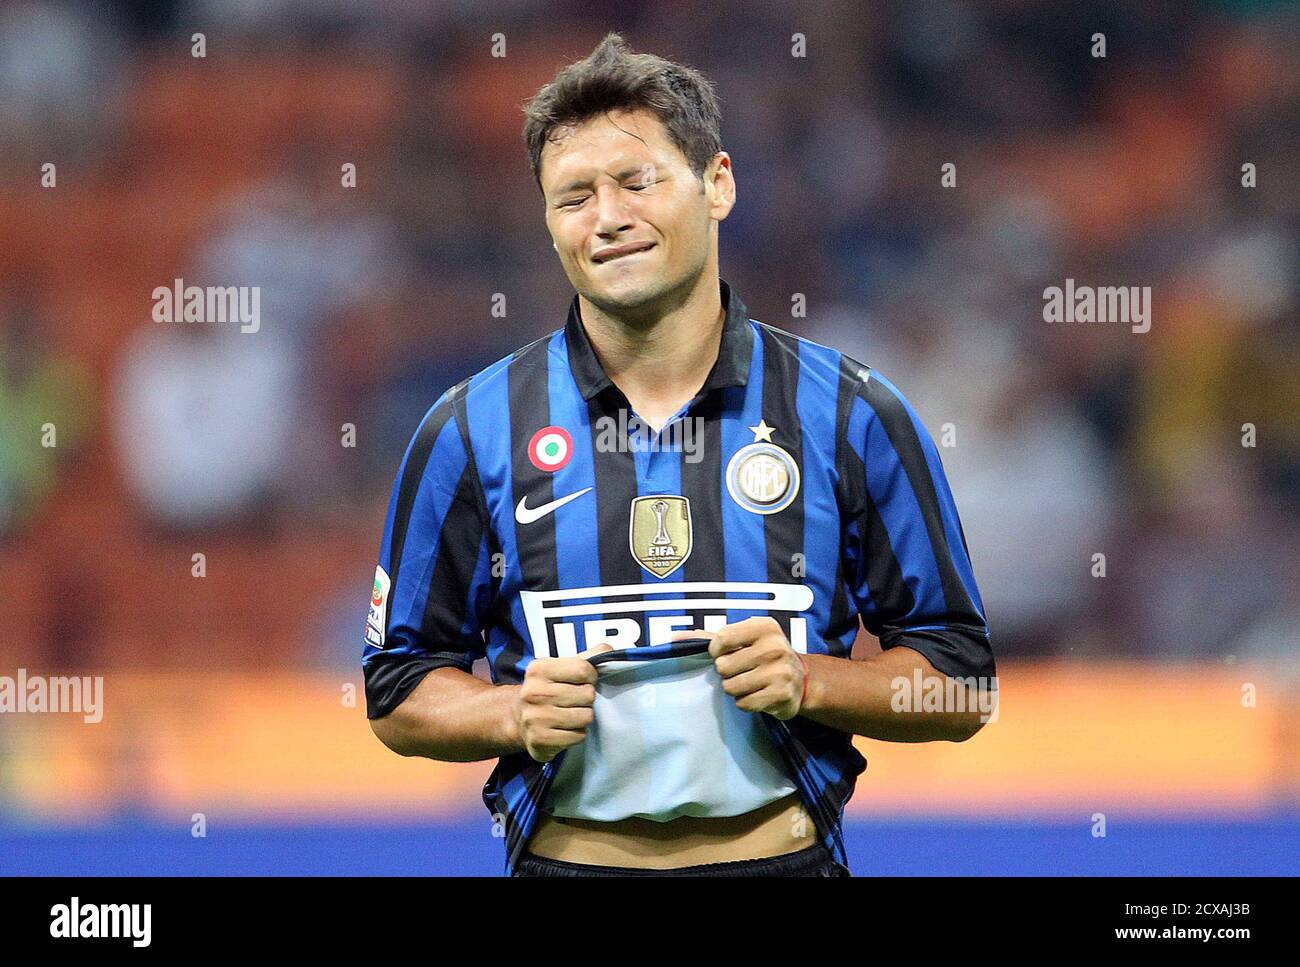 Inter Milan's Mauro Zarate reacts during their Serie A soccer match against  AS Roma at the San Siro stadium in Milan September 17, 2011.  REUTERS/Giorgio Benvenuti (ITALY - Tags: SPORT SOCCER Stock